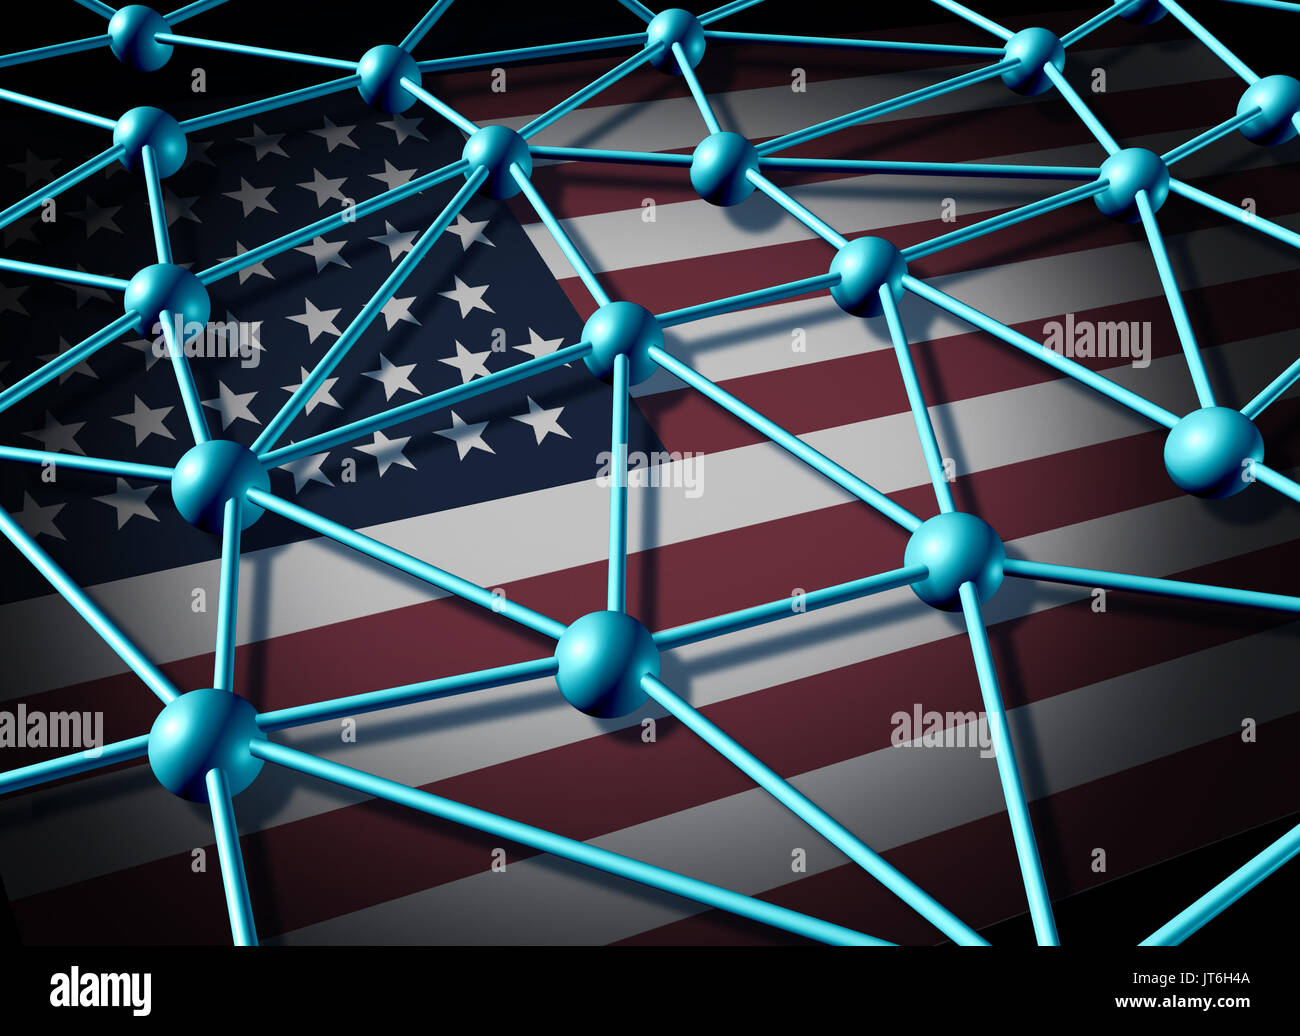 American data network and united States communicaions technology and internet security from hacking or web social networking as a 3D illustration. Stock Photo